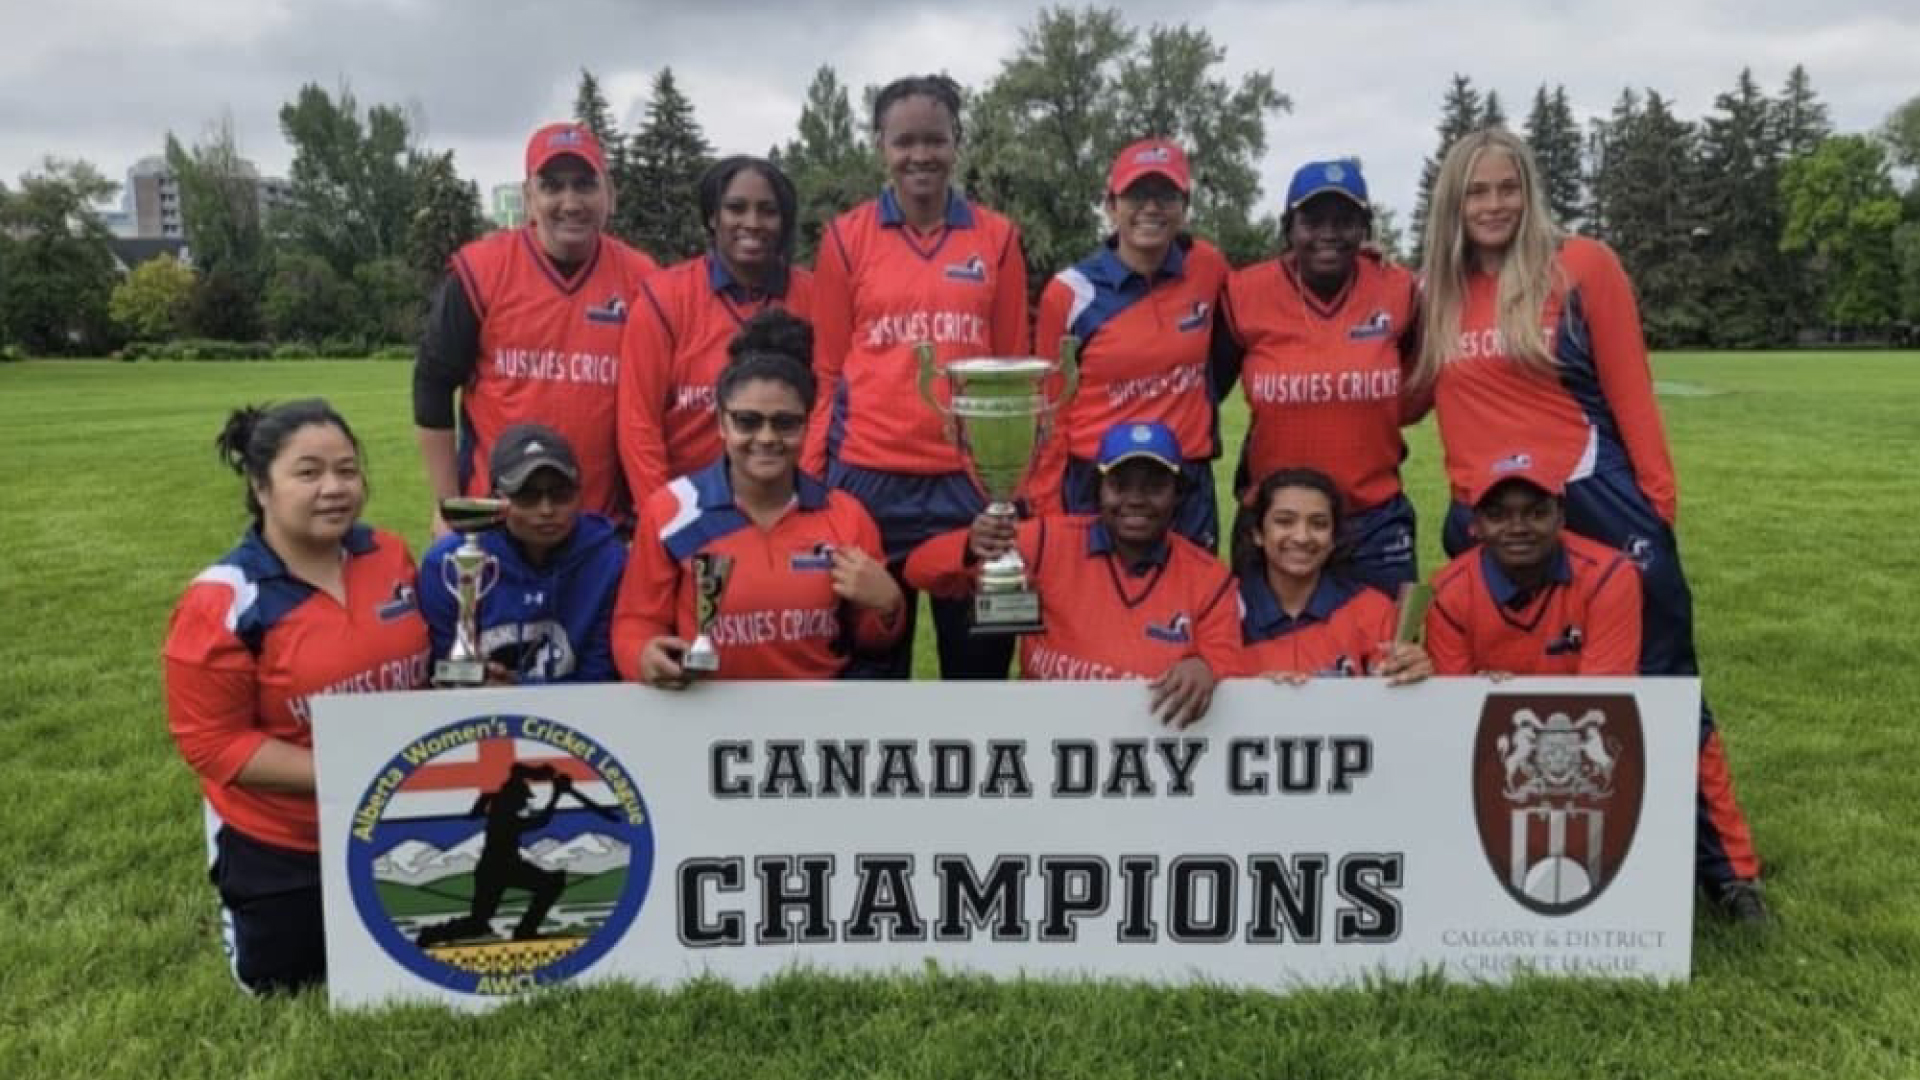 Women's Cricket Huskies triumphant at Canada Day Cup